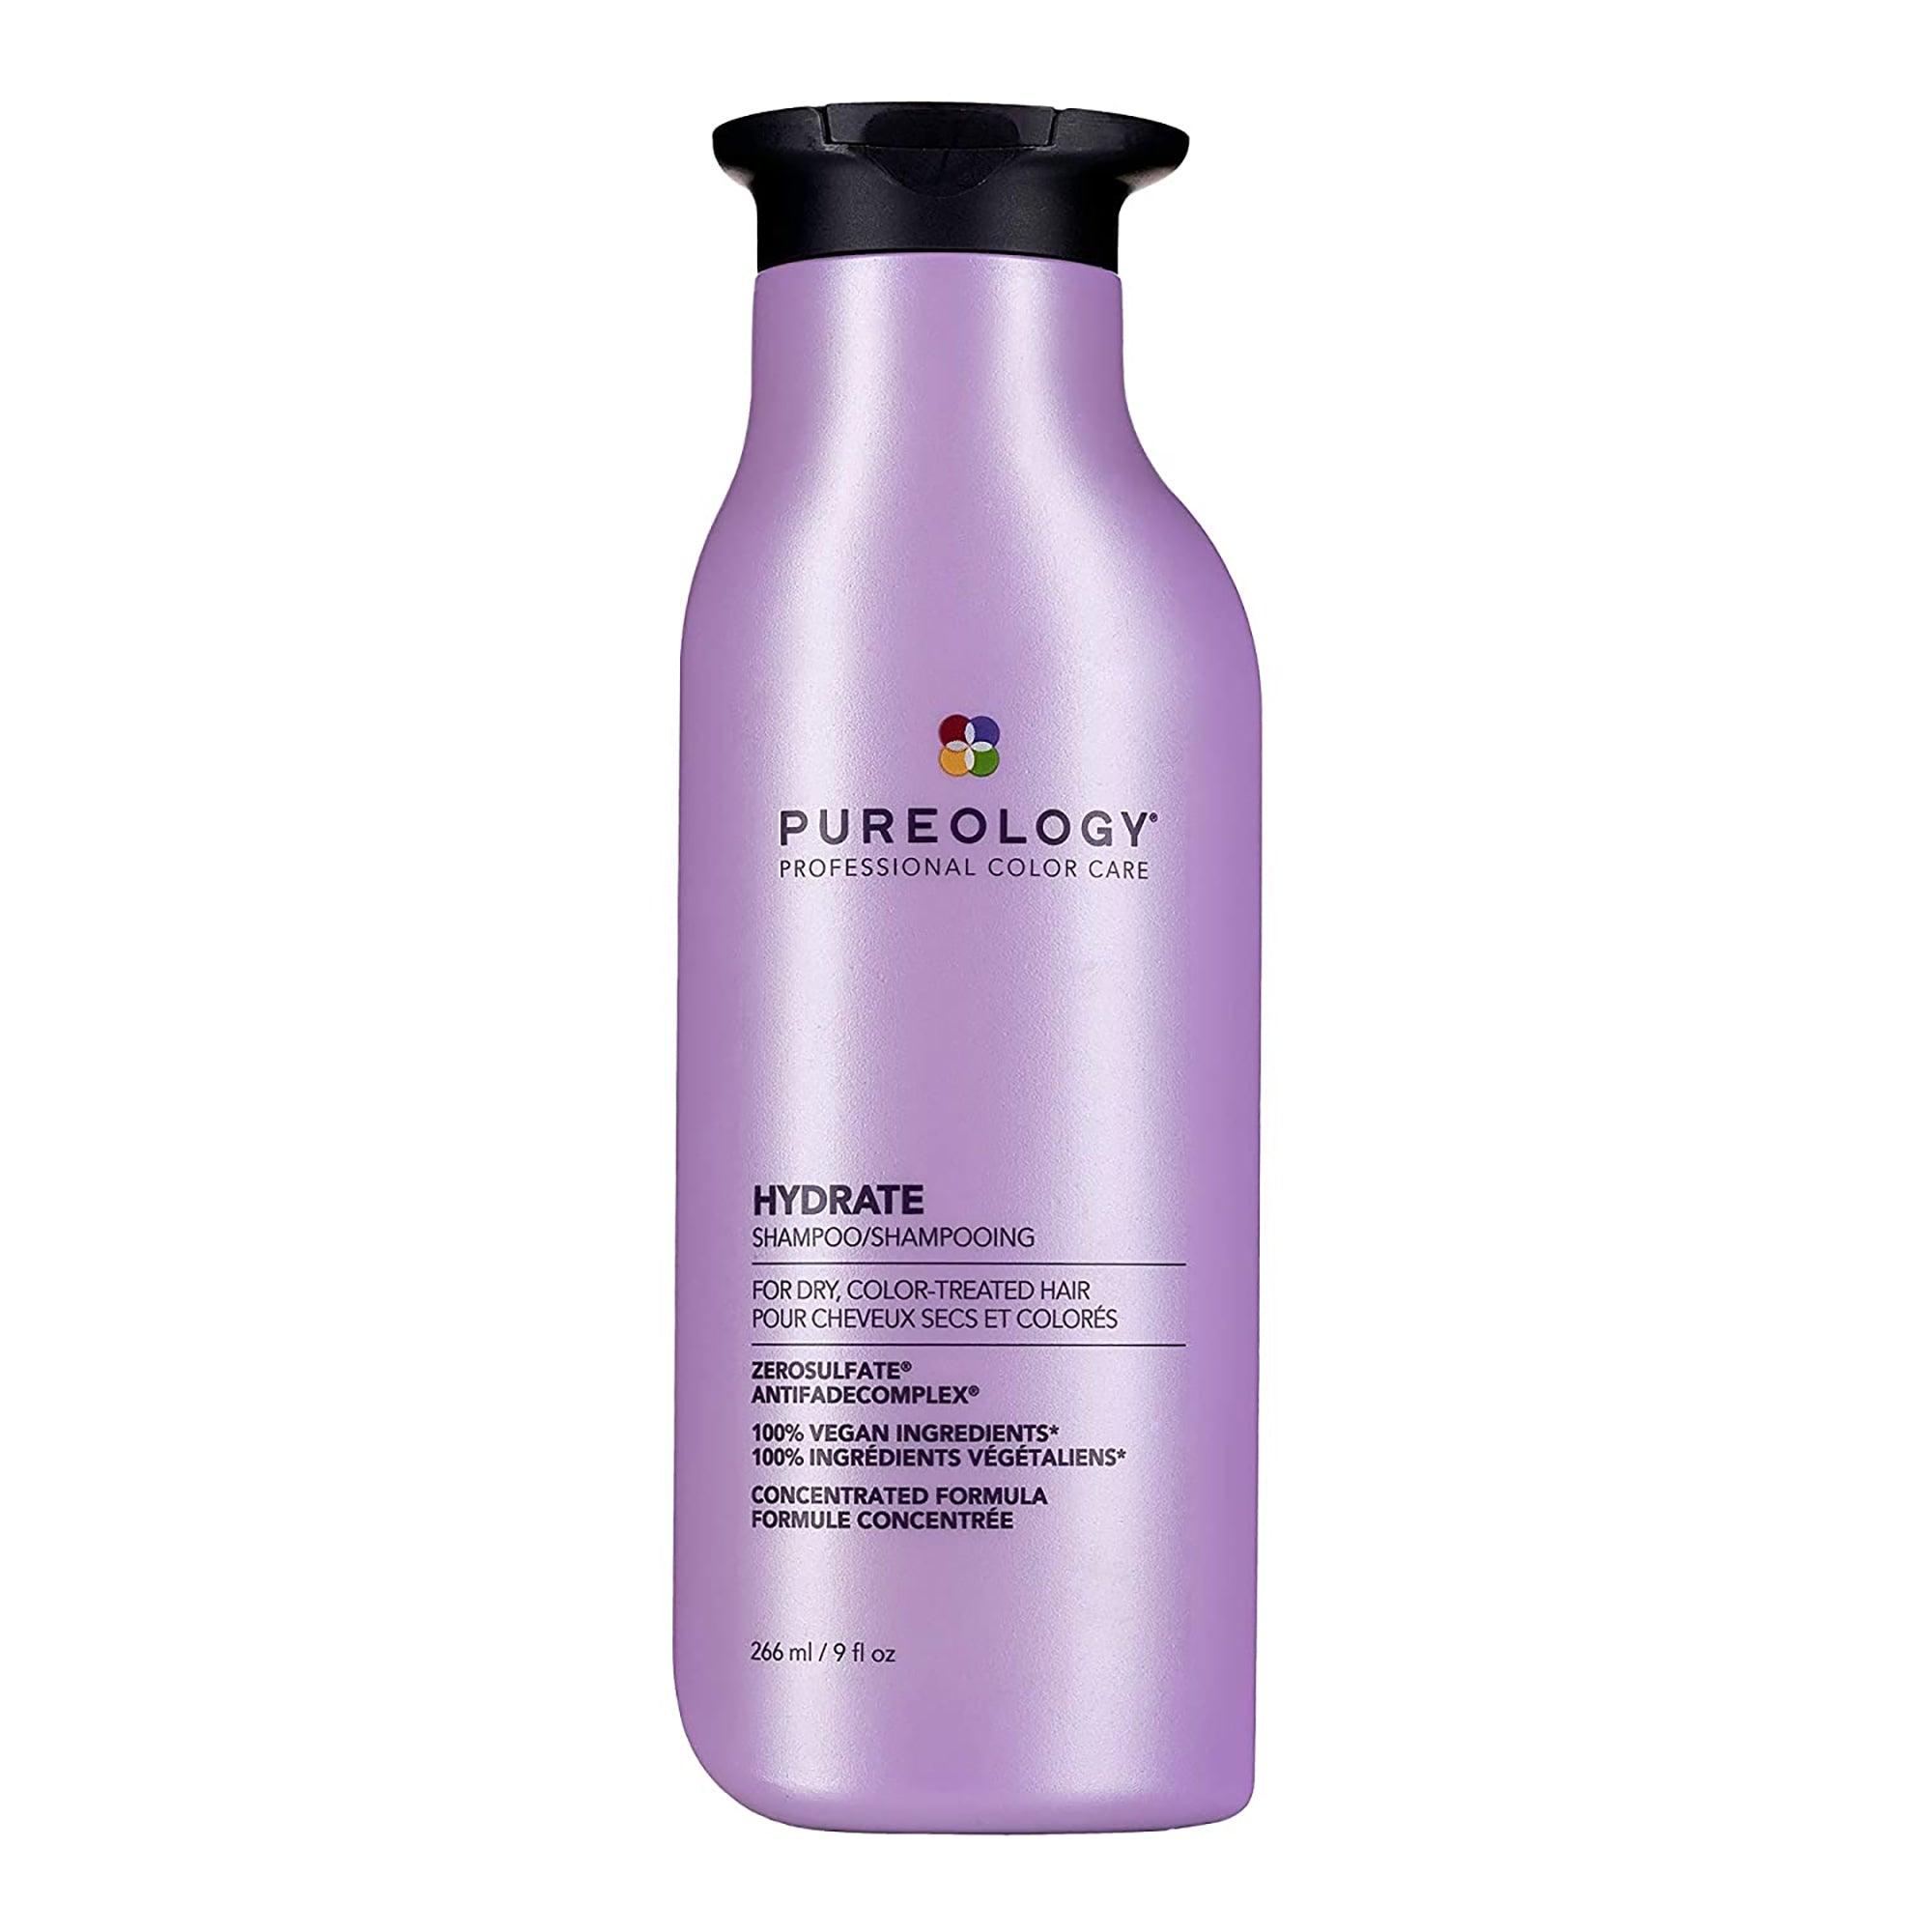 Pureology Hydrate Shampoo & Conditioner 9oz. Duo ($72 Value) / 9OZ